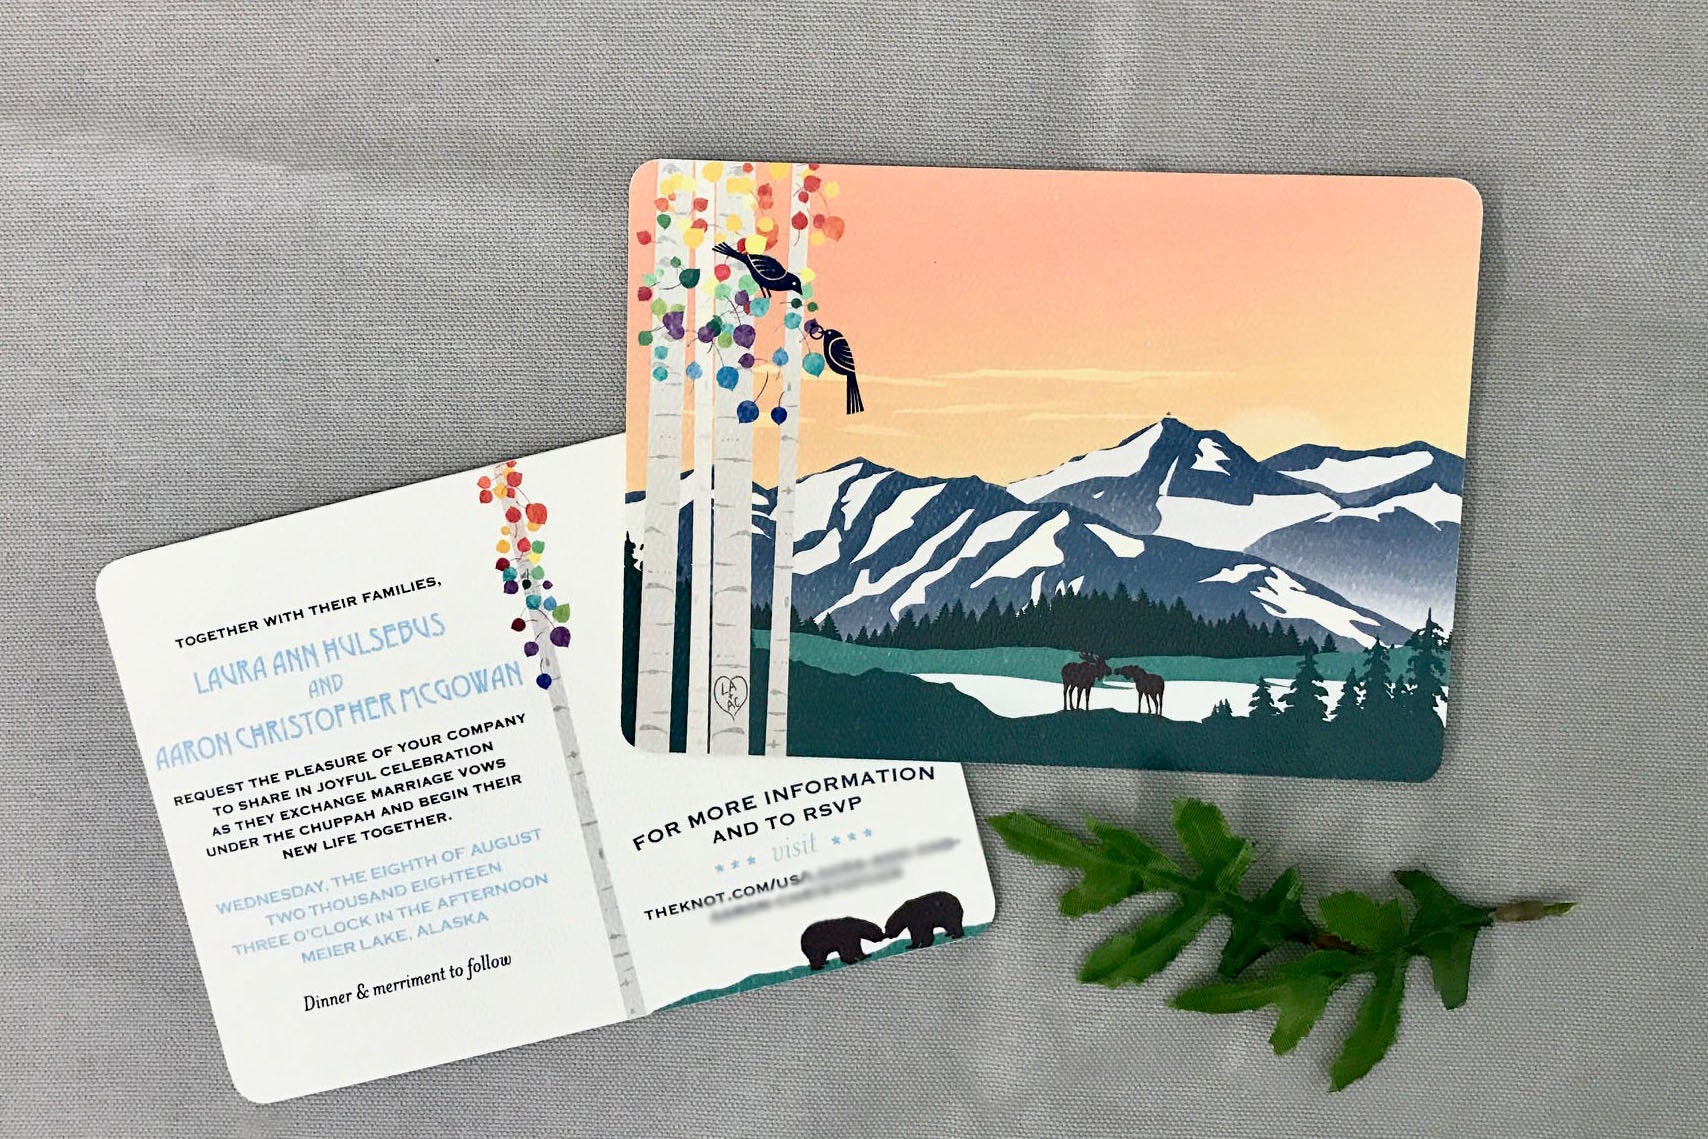 Meier Lake Alaska Mountains at Sunset with Colorful Birch Trees and Kissing Moose 5x7 Wedding Invitation and A7 Envelopes